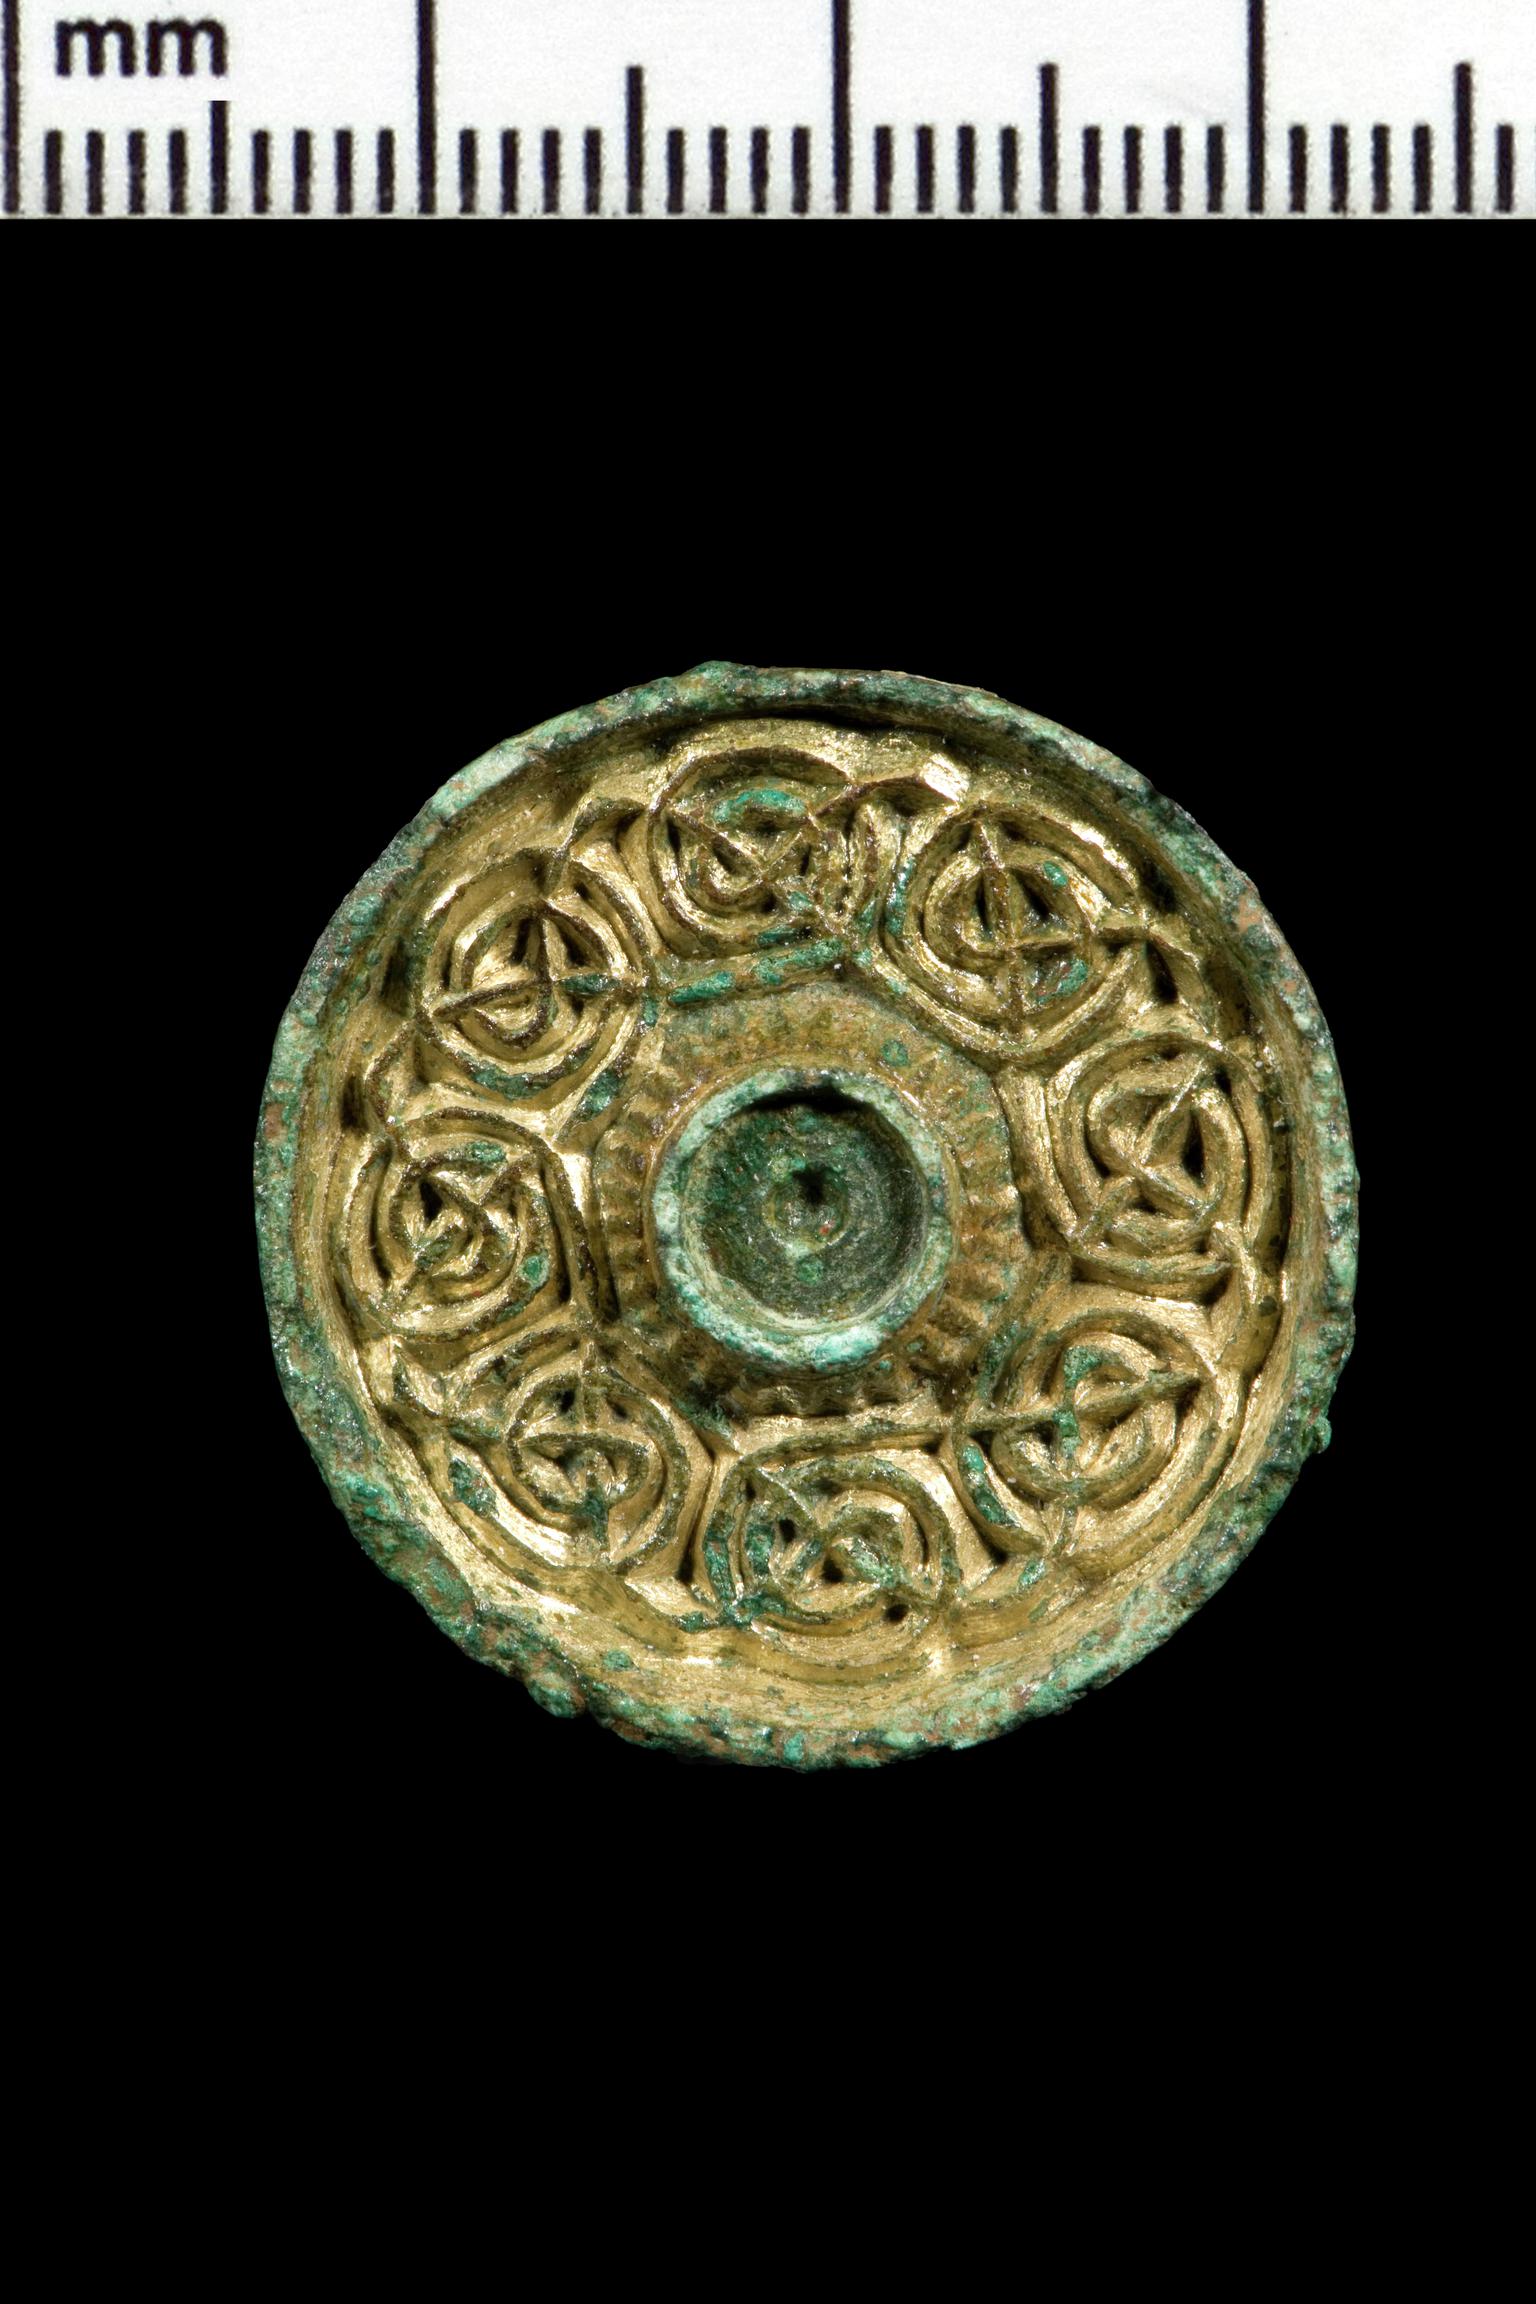 Early Medieval copper alloy shrine mount